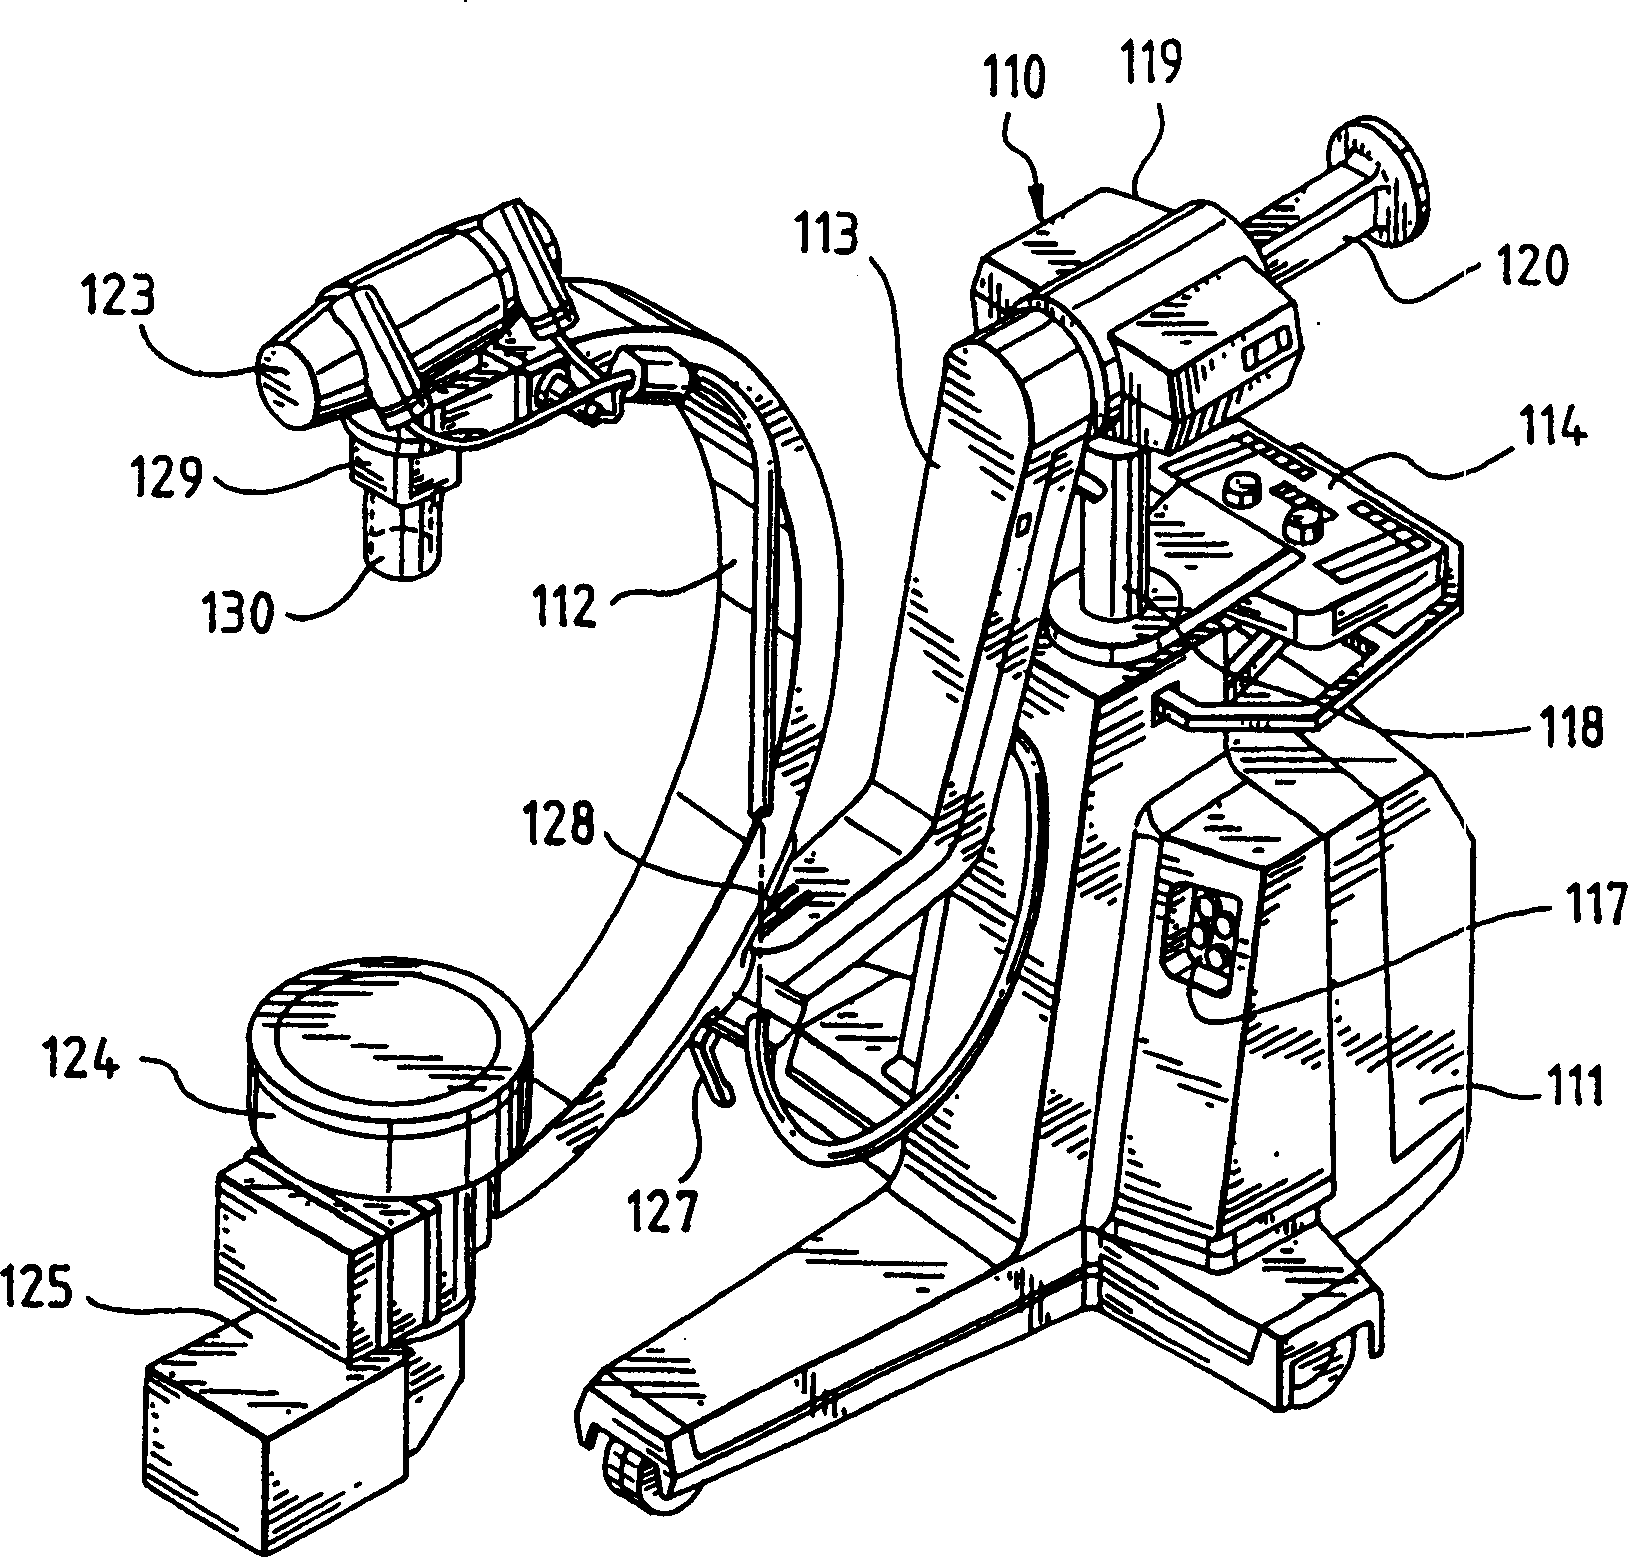 Method and apparatus for obtaining and displaying computerized tomography images by fluoroscopic imaging system